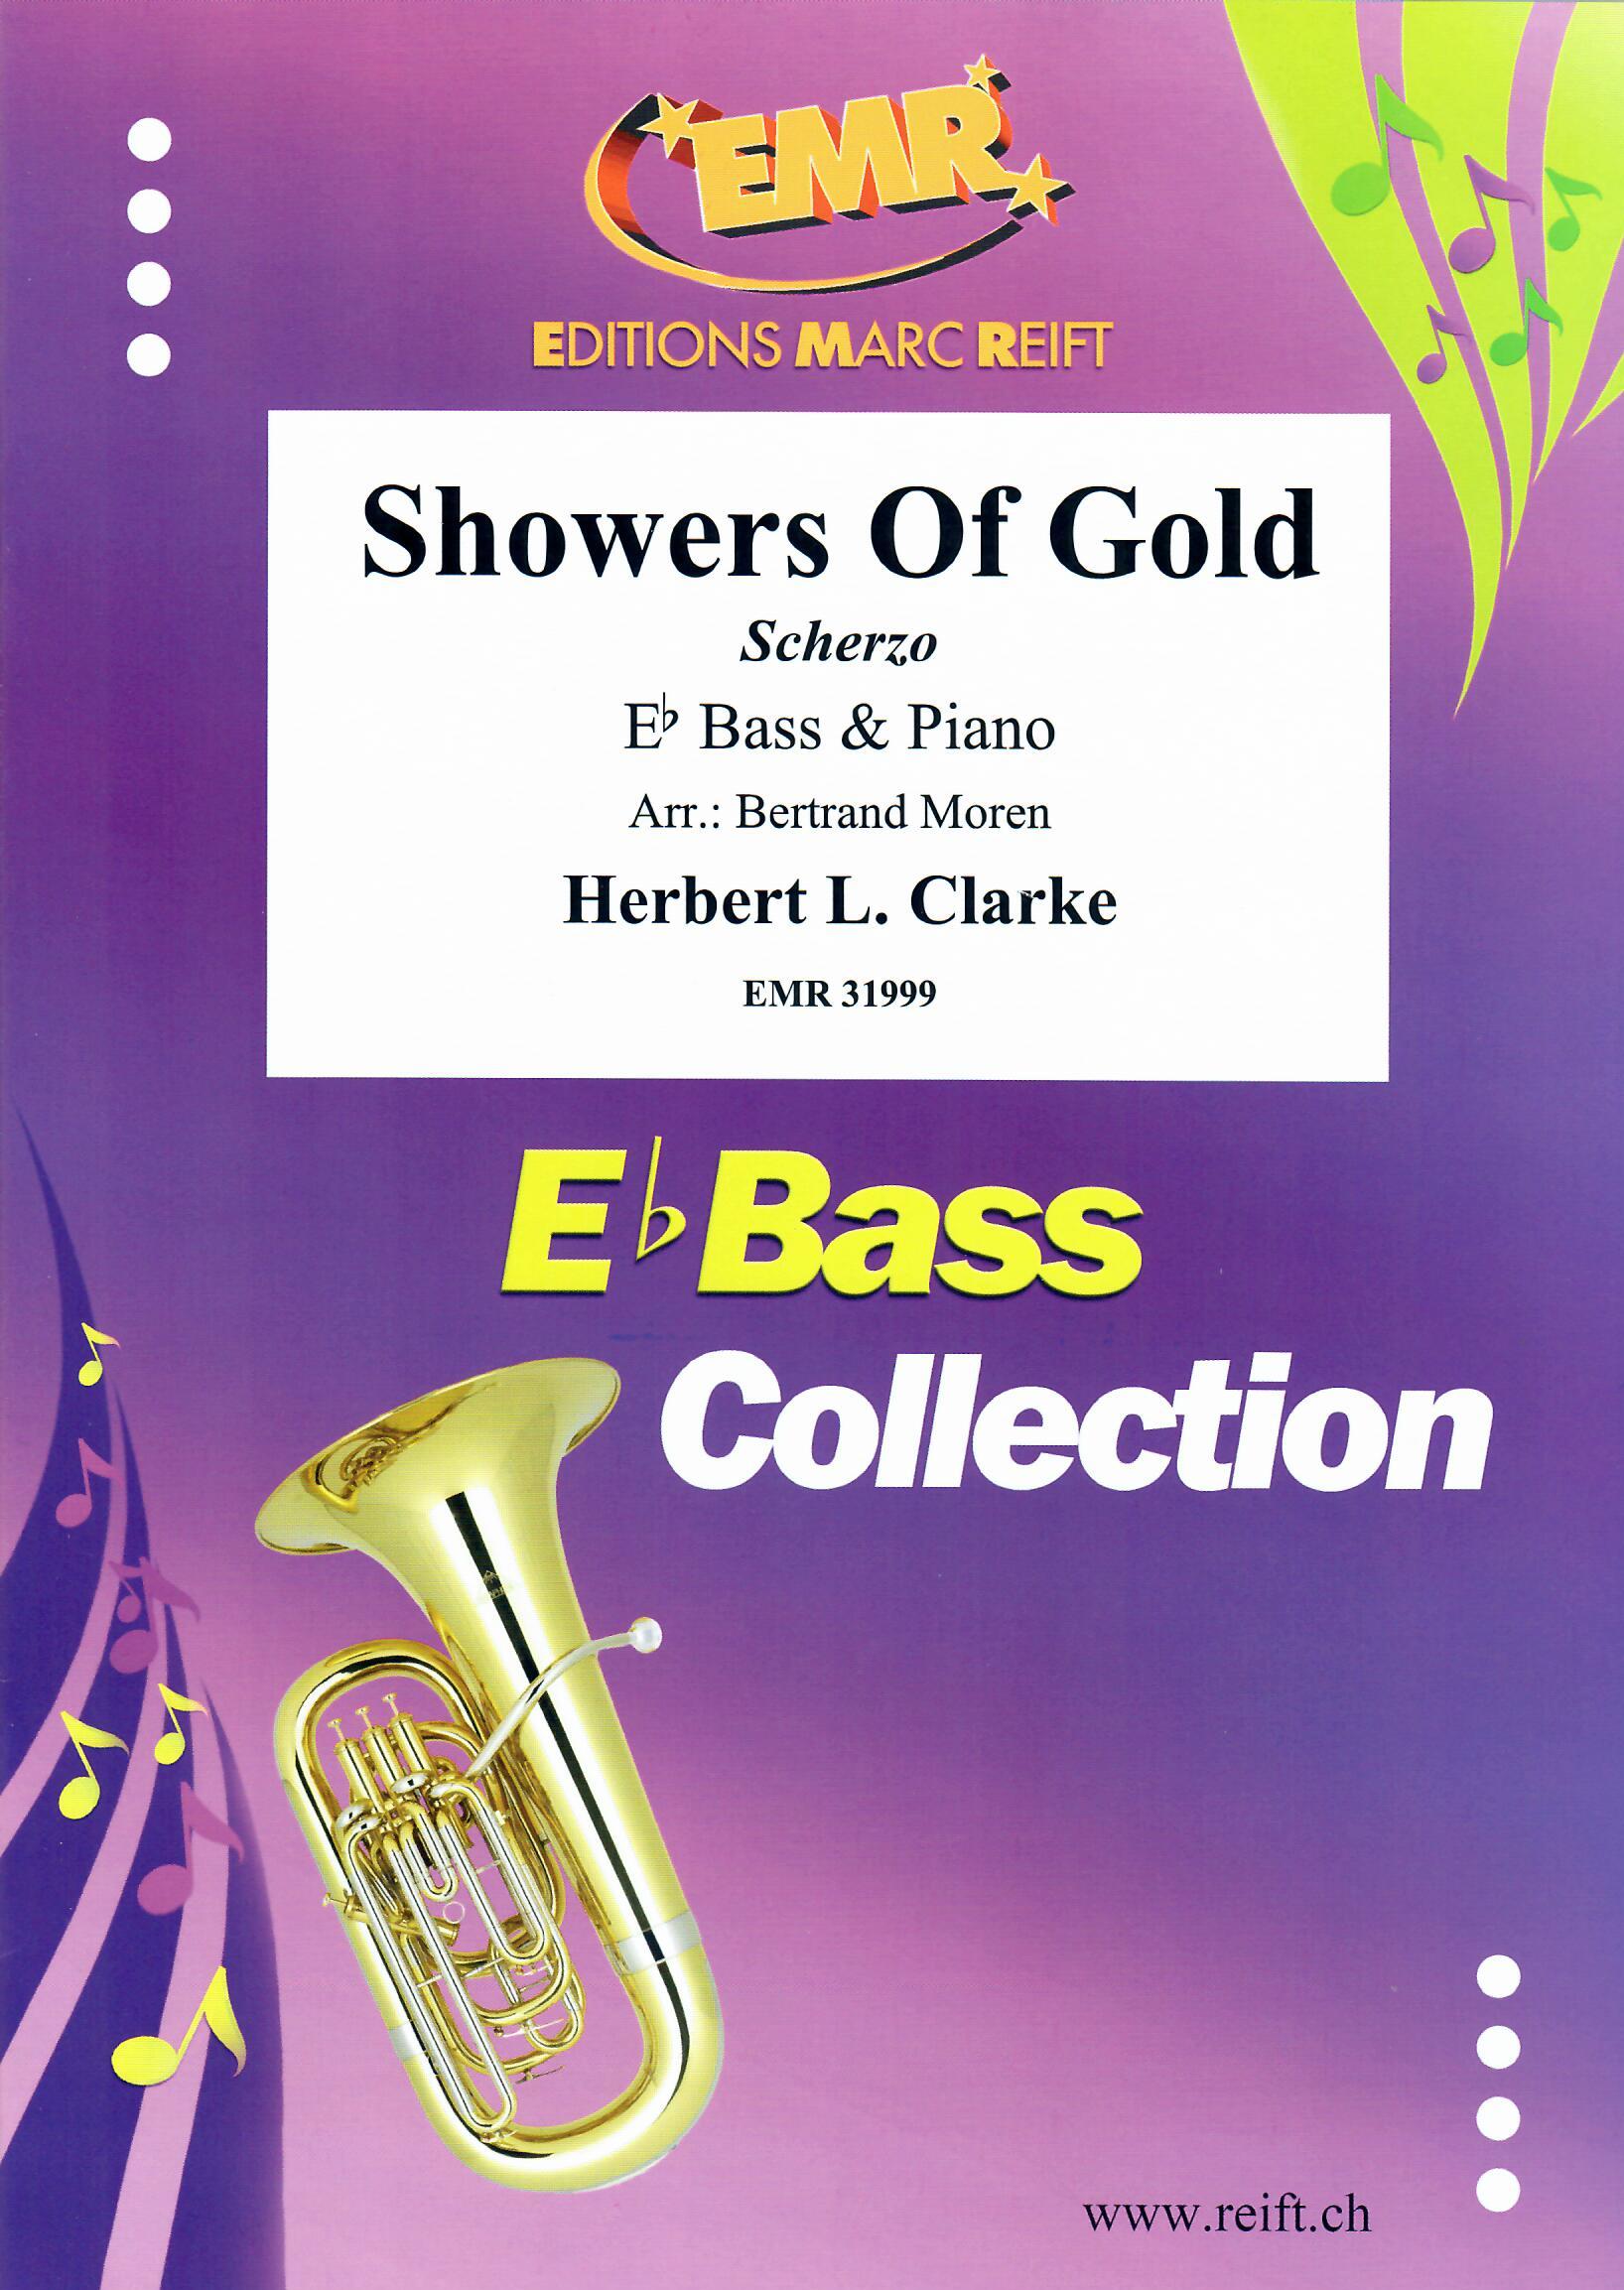 SHOWERS OF GOLD